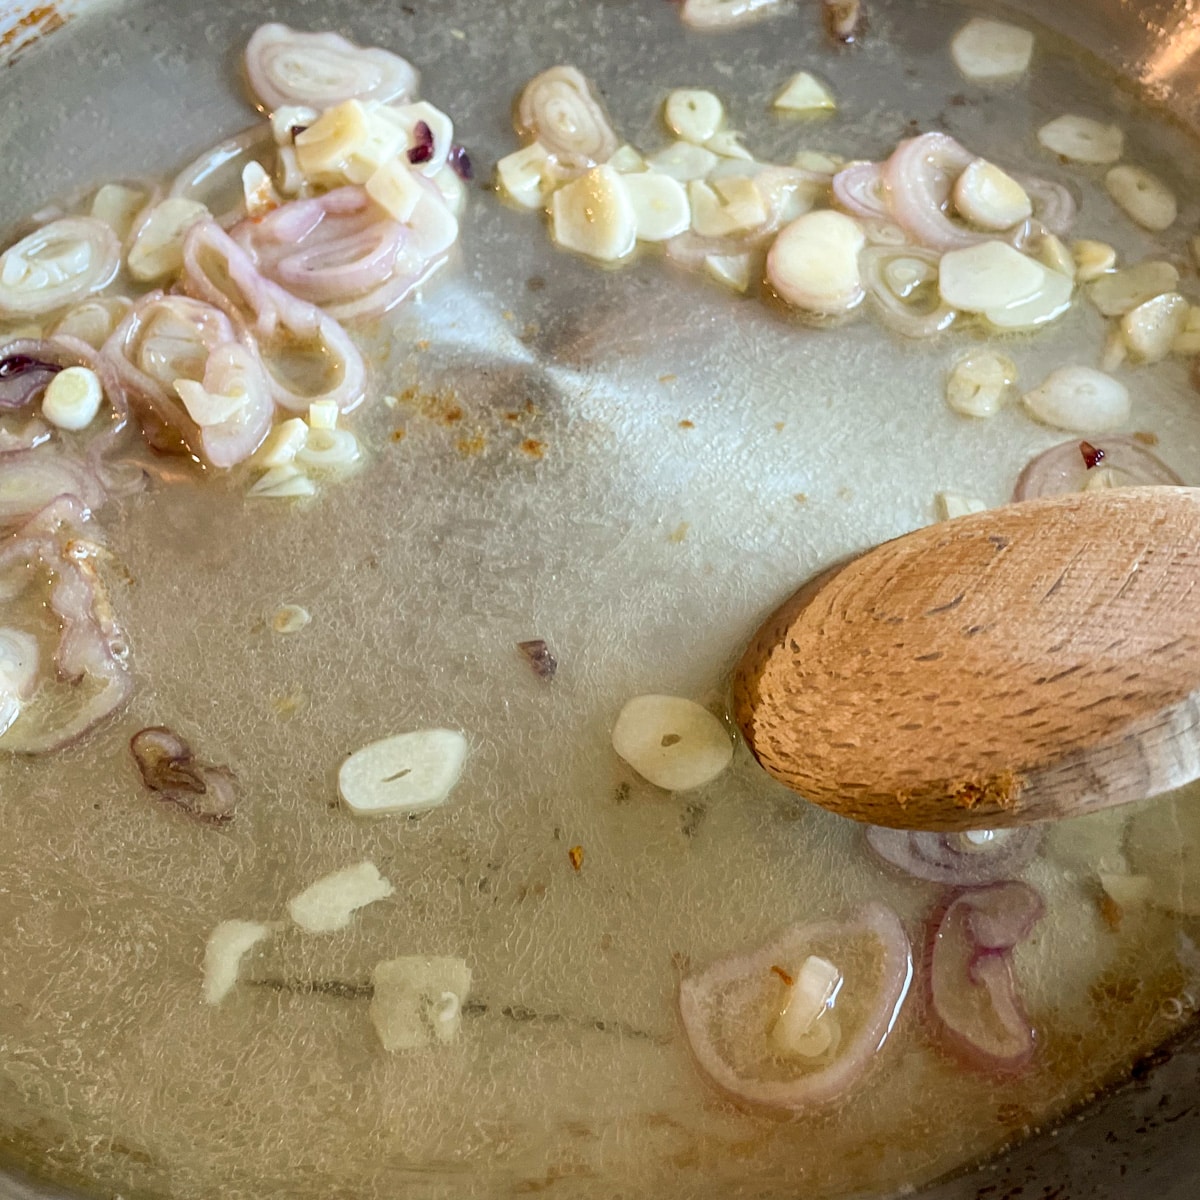 Sautéed shallots and garlic are shown in a stainless steel pan with white wine and lemon juice with a wooden spoon mixing the ingredients together.